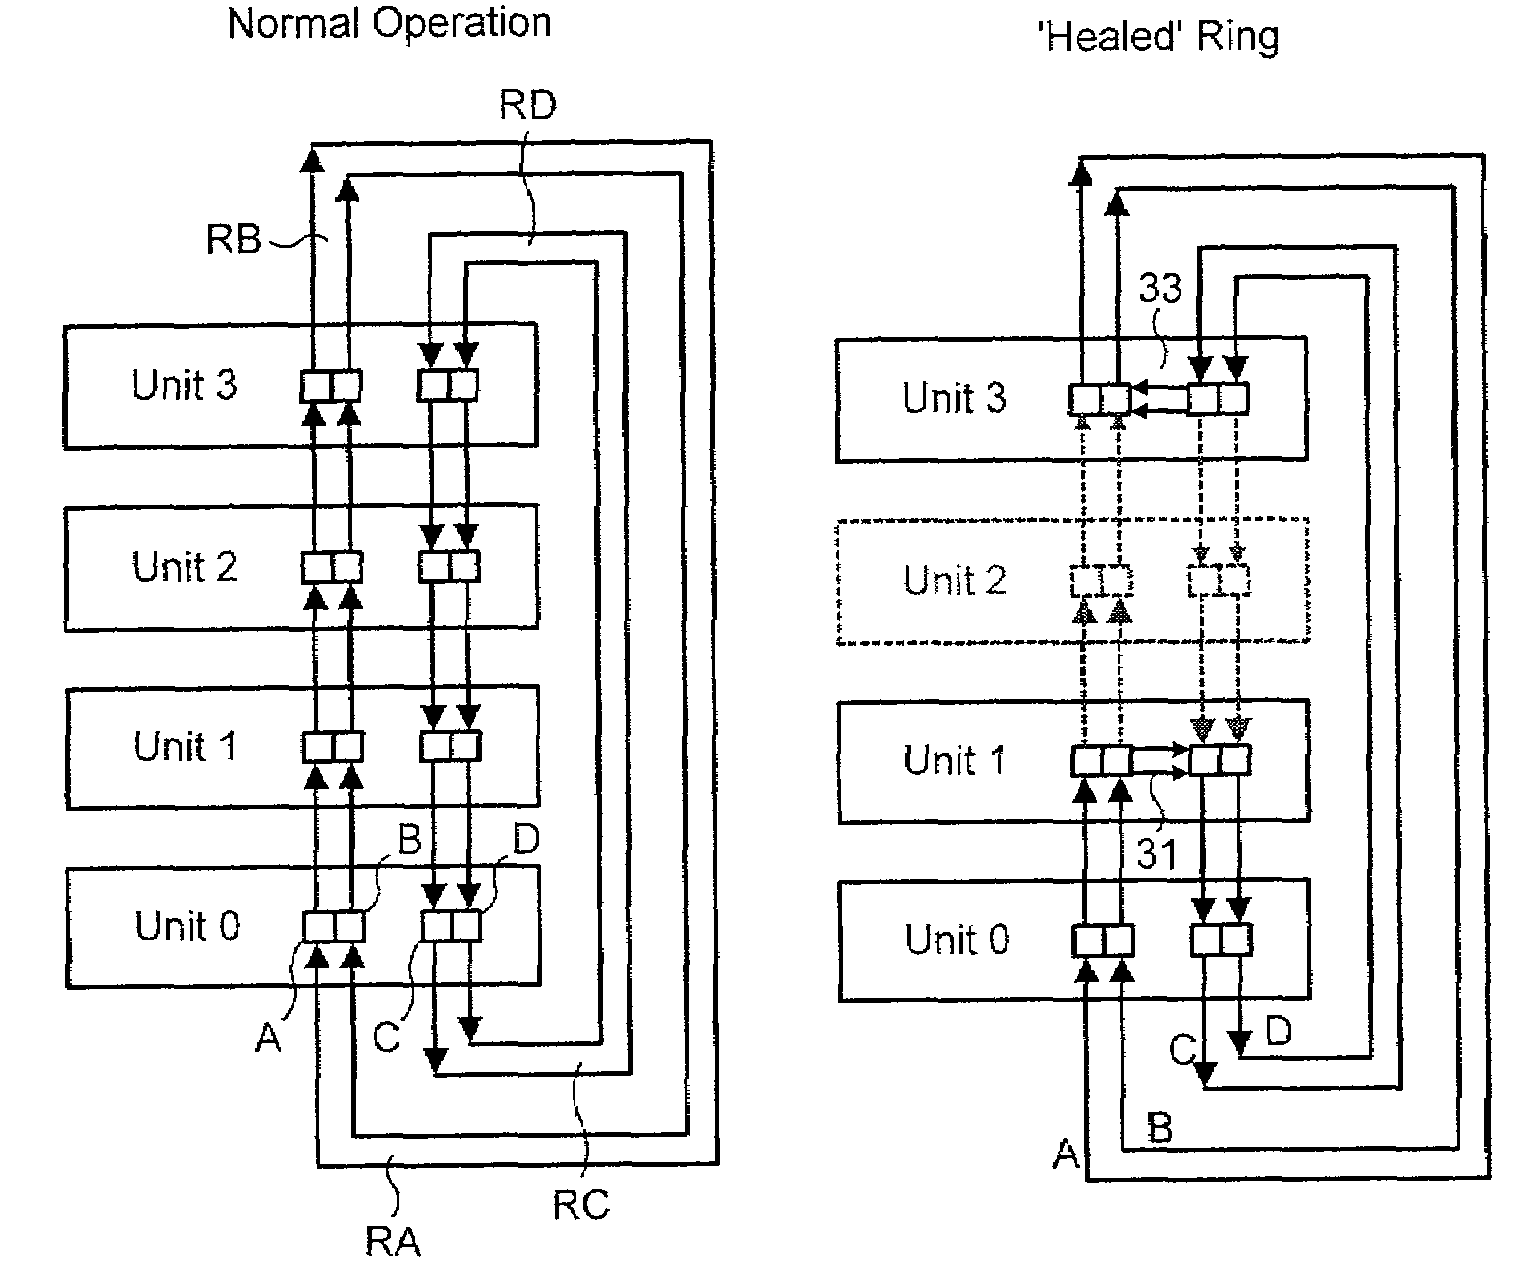 Cascade system for network units